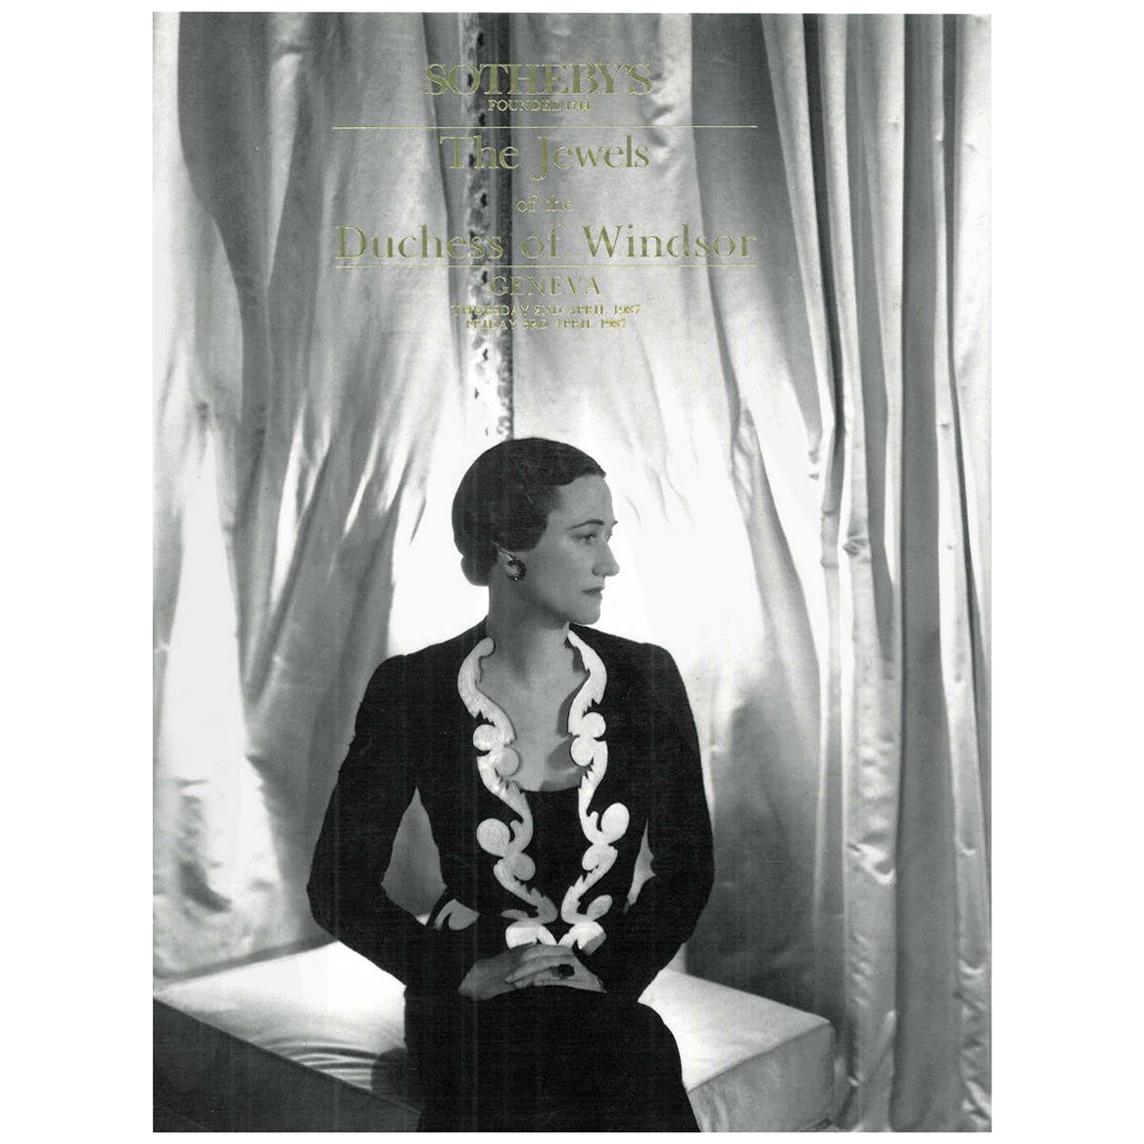 Book of the Jewels of the Duchess of Windsor, Sotheby's, April 1987